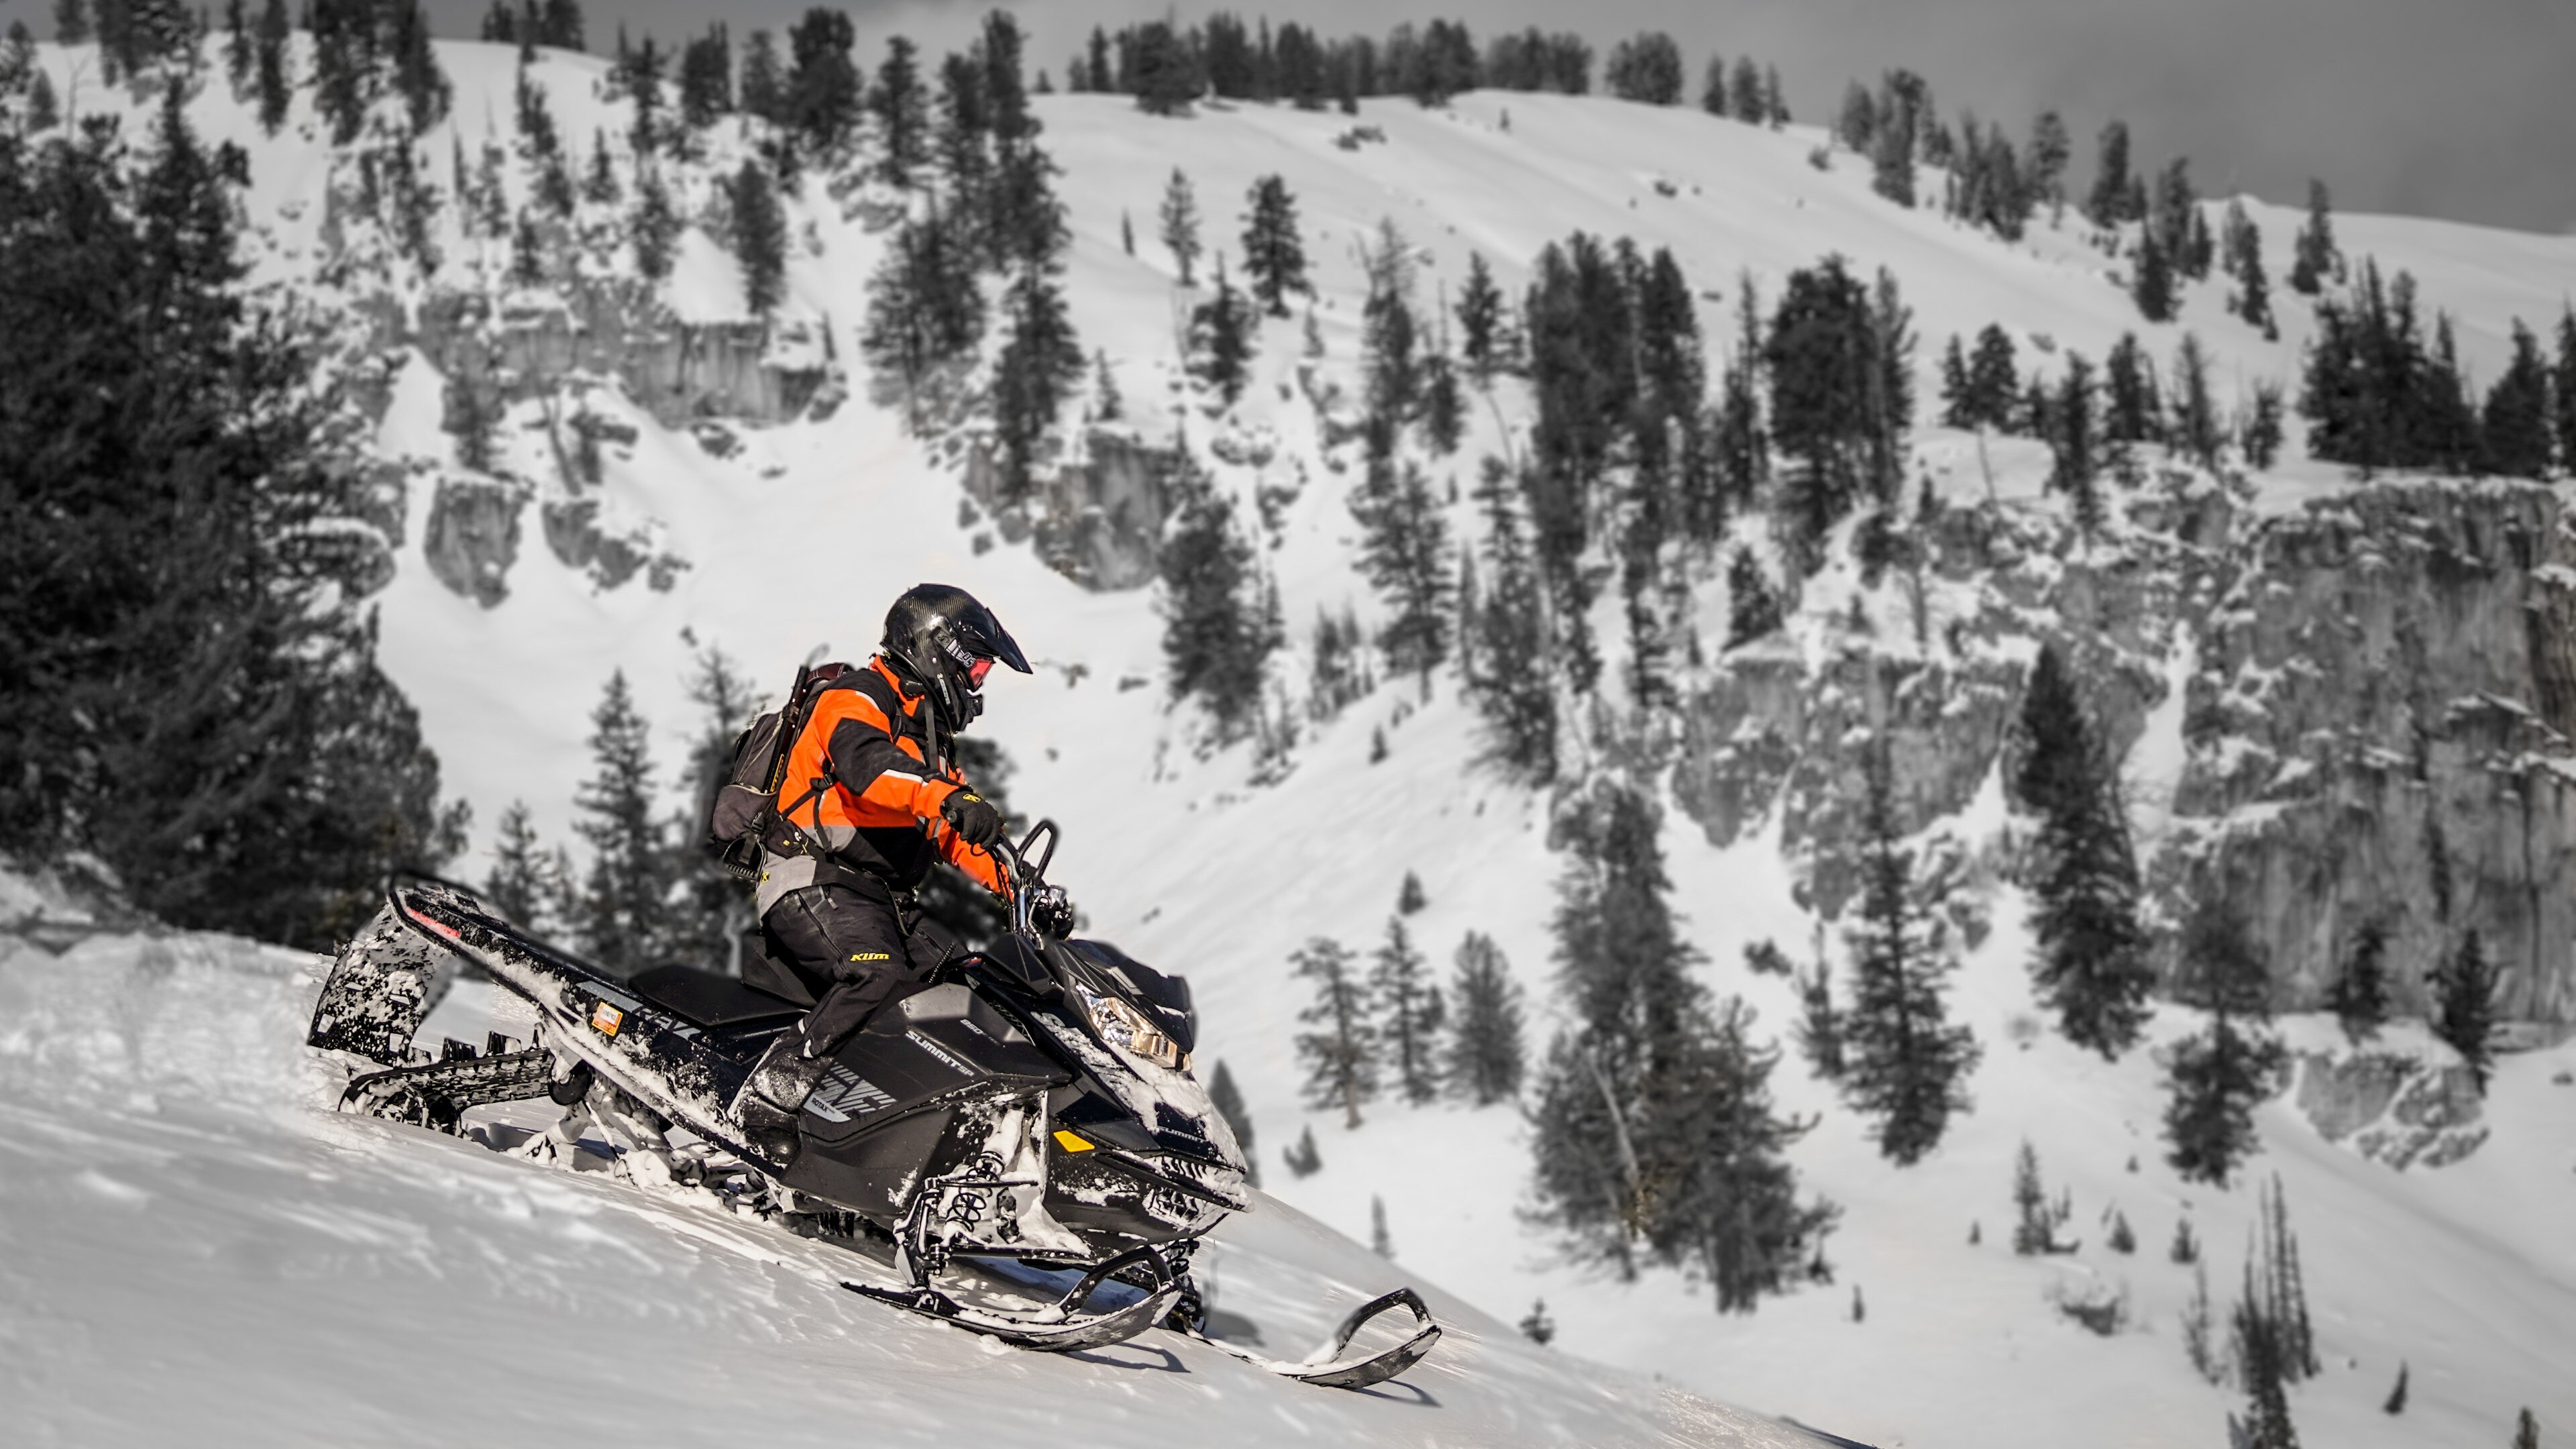 Landscape and Ski-Doo with mountains and trees